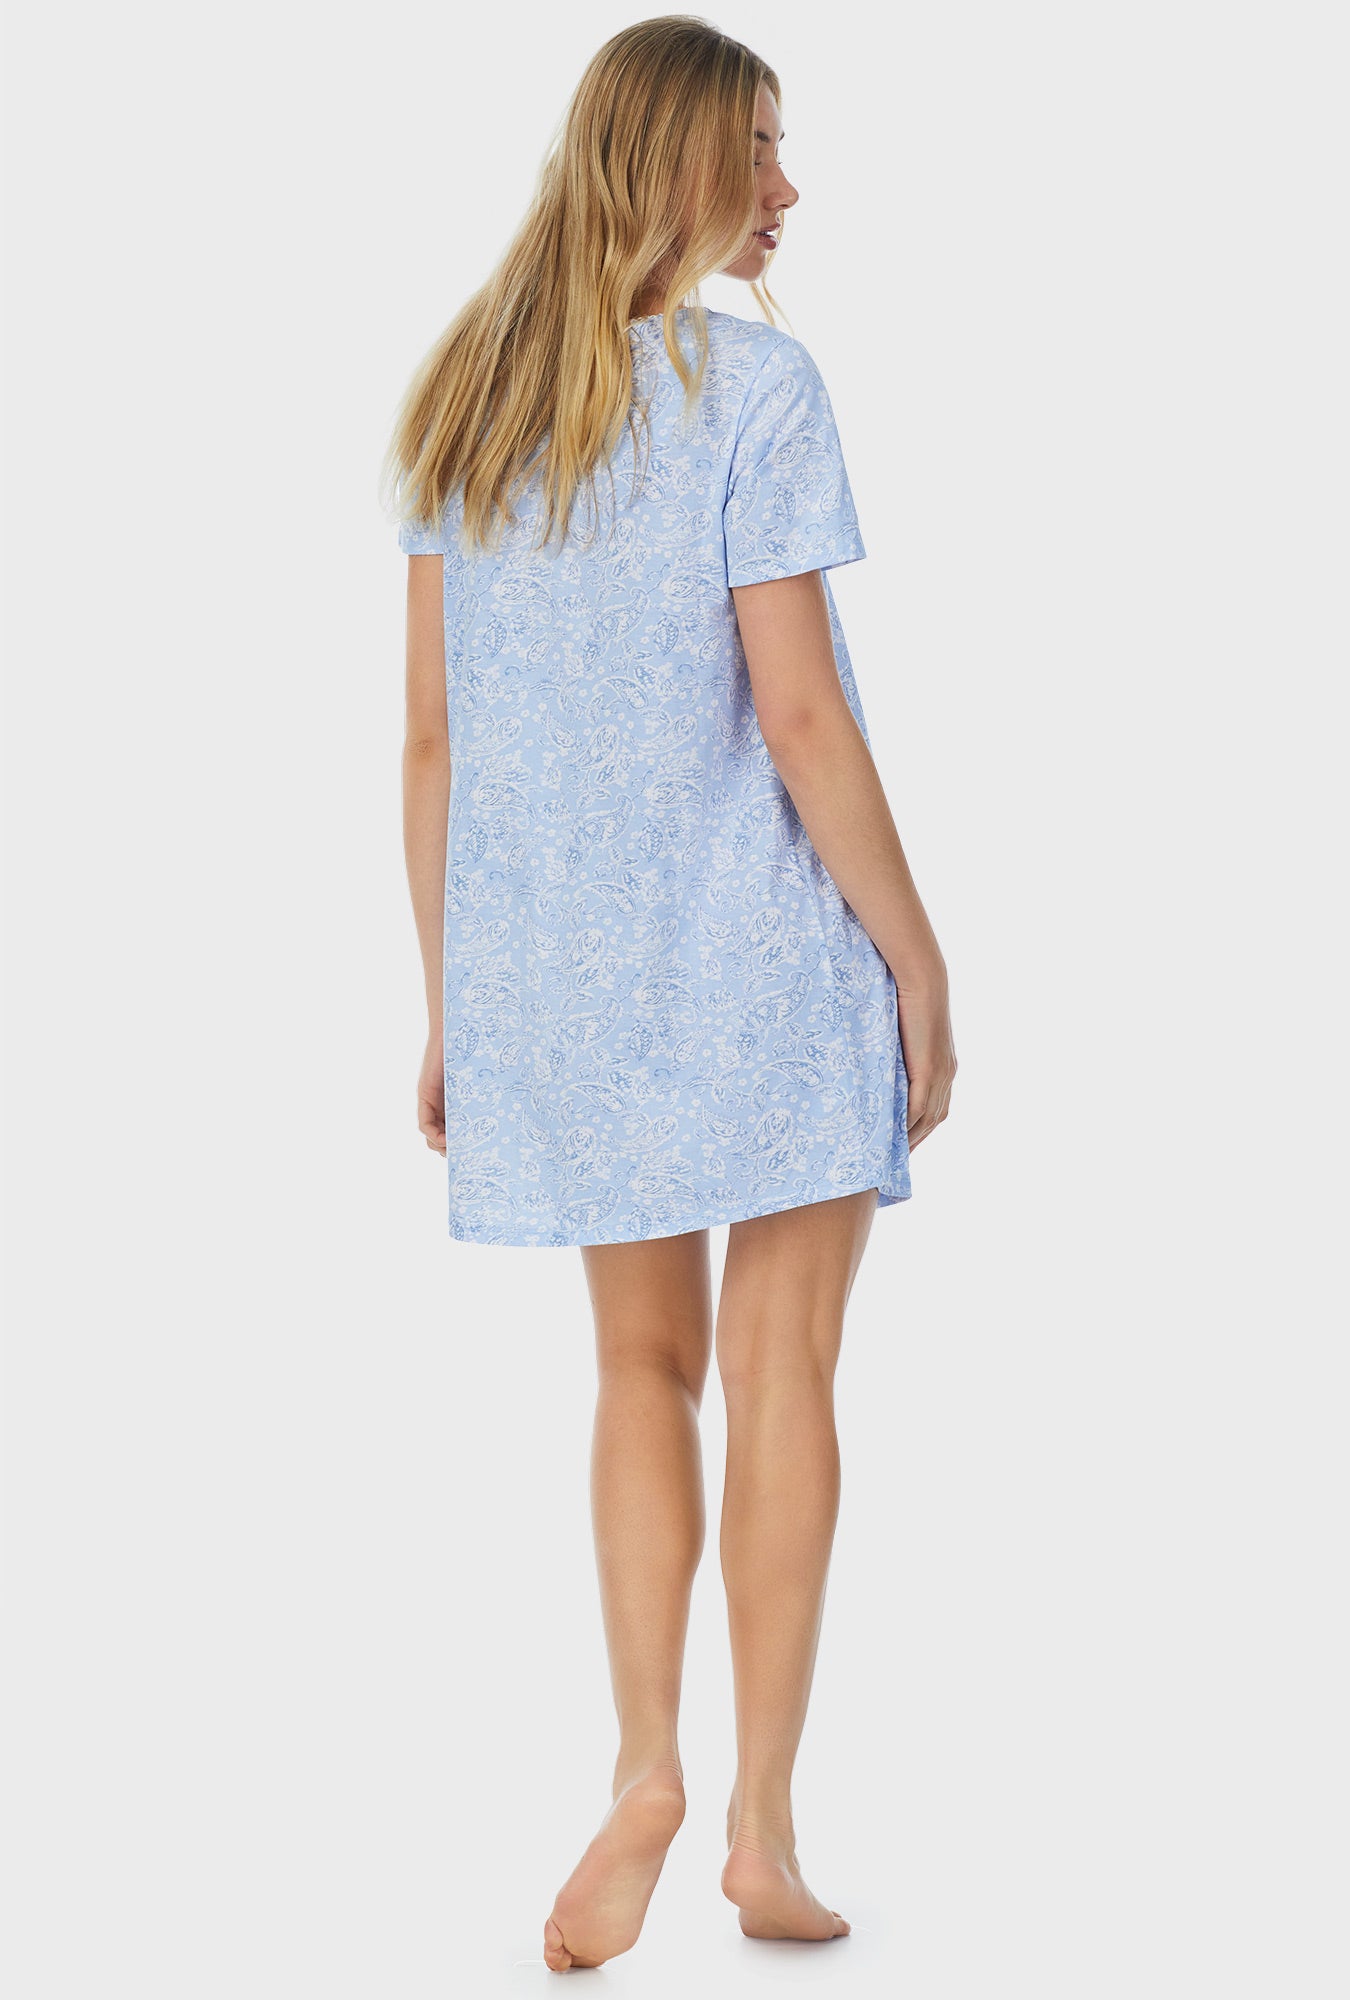 A lady wearing blue short sleeve short nightgown with blooming paisley print.